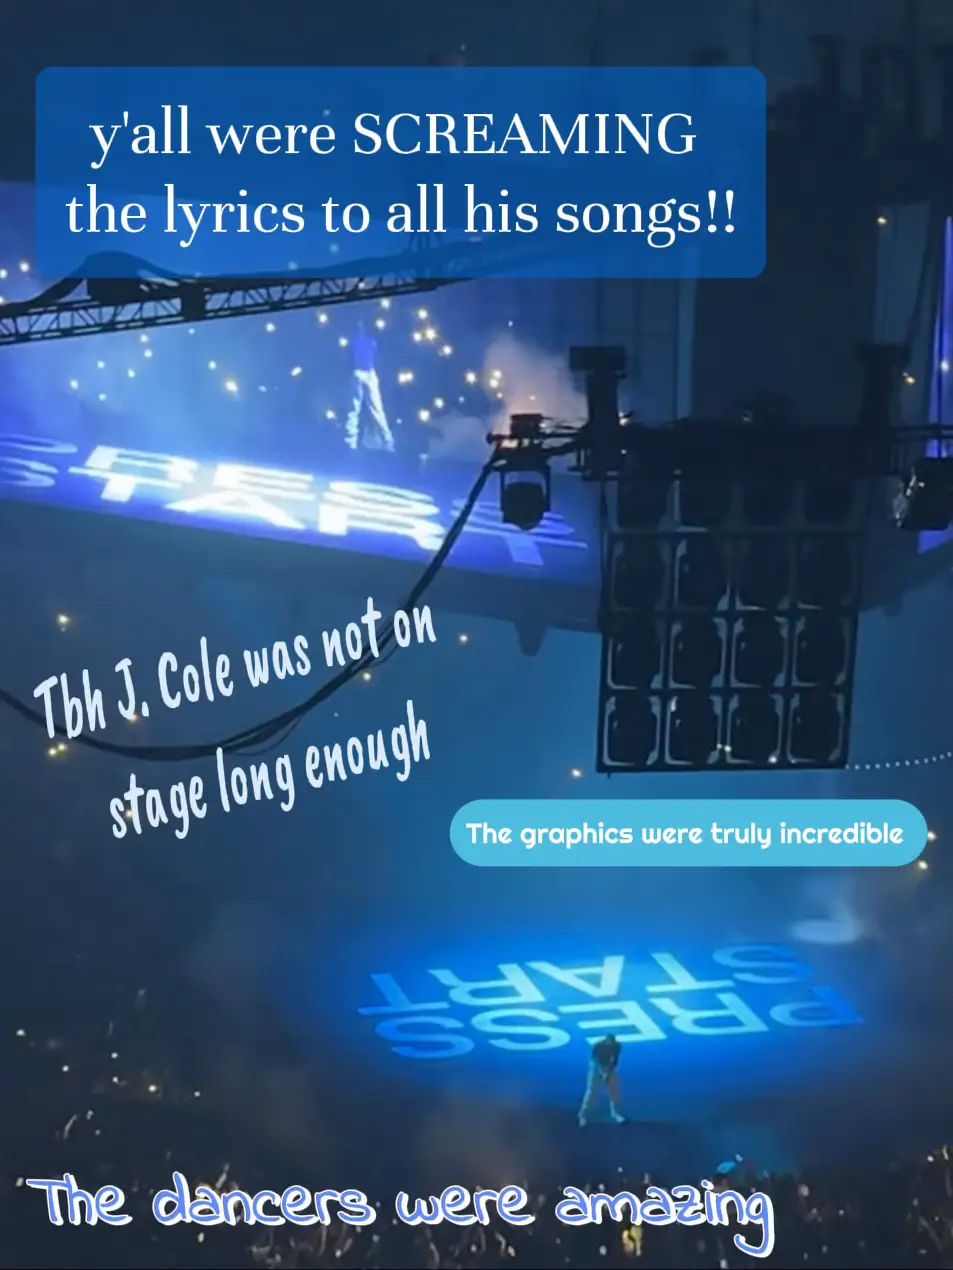  A concert with a stage and a crowd of people. The lyrics to all his songs were